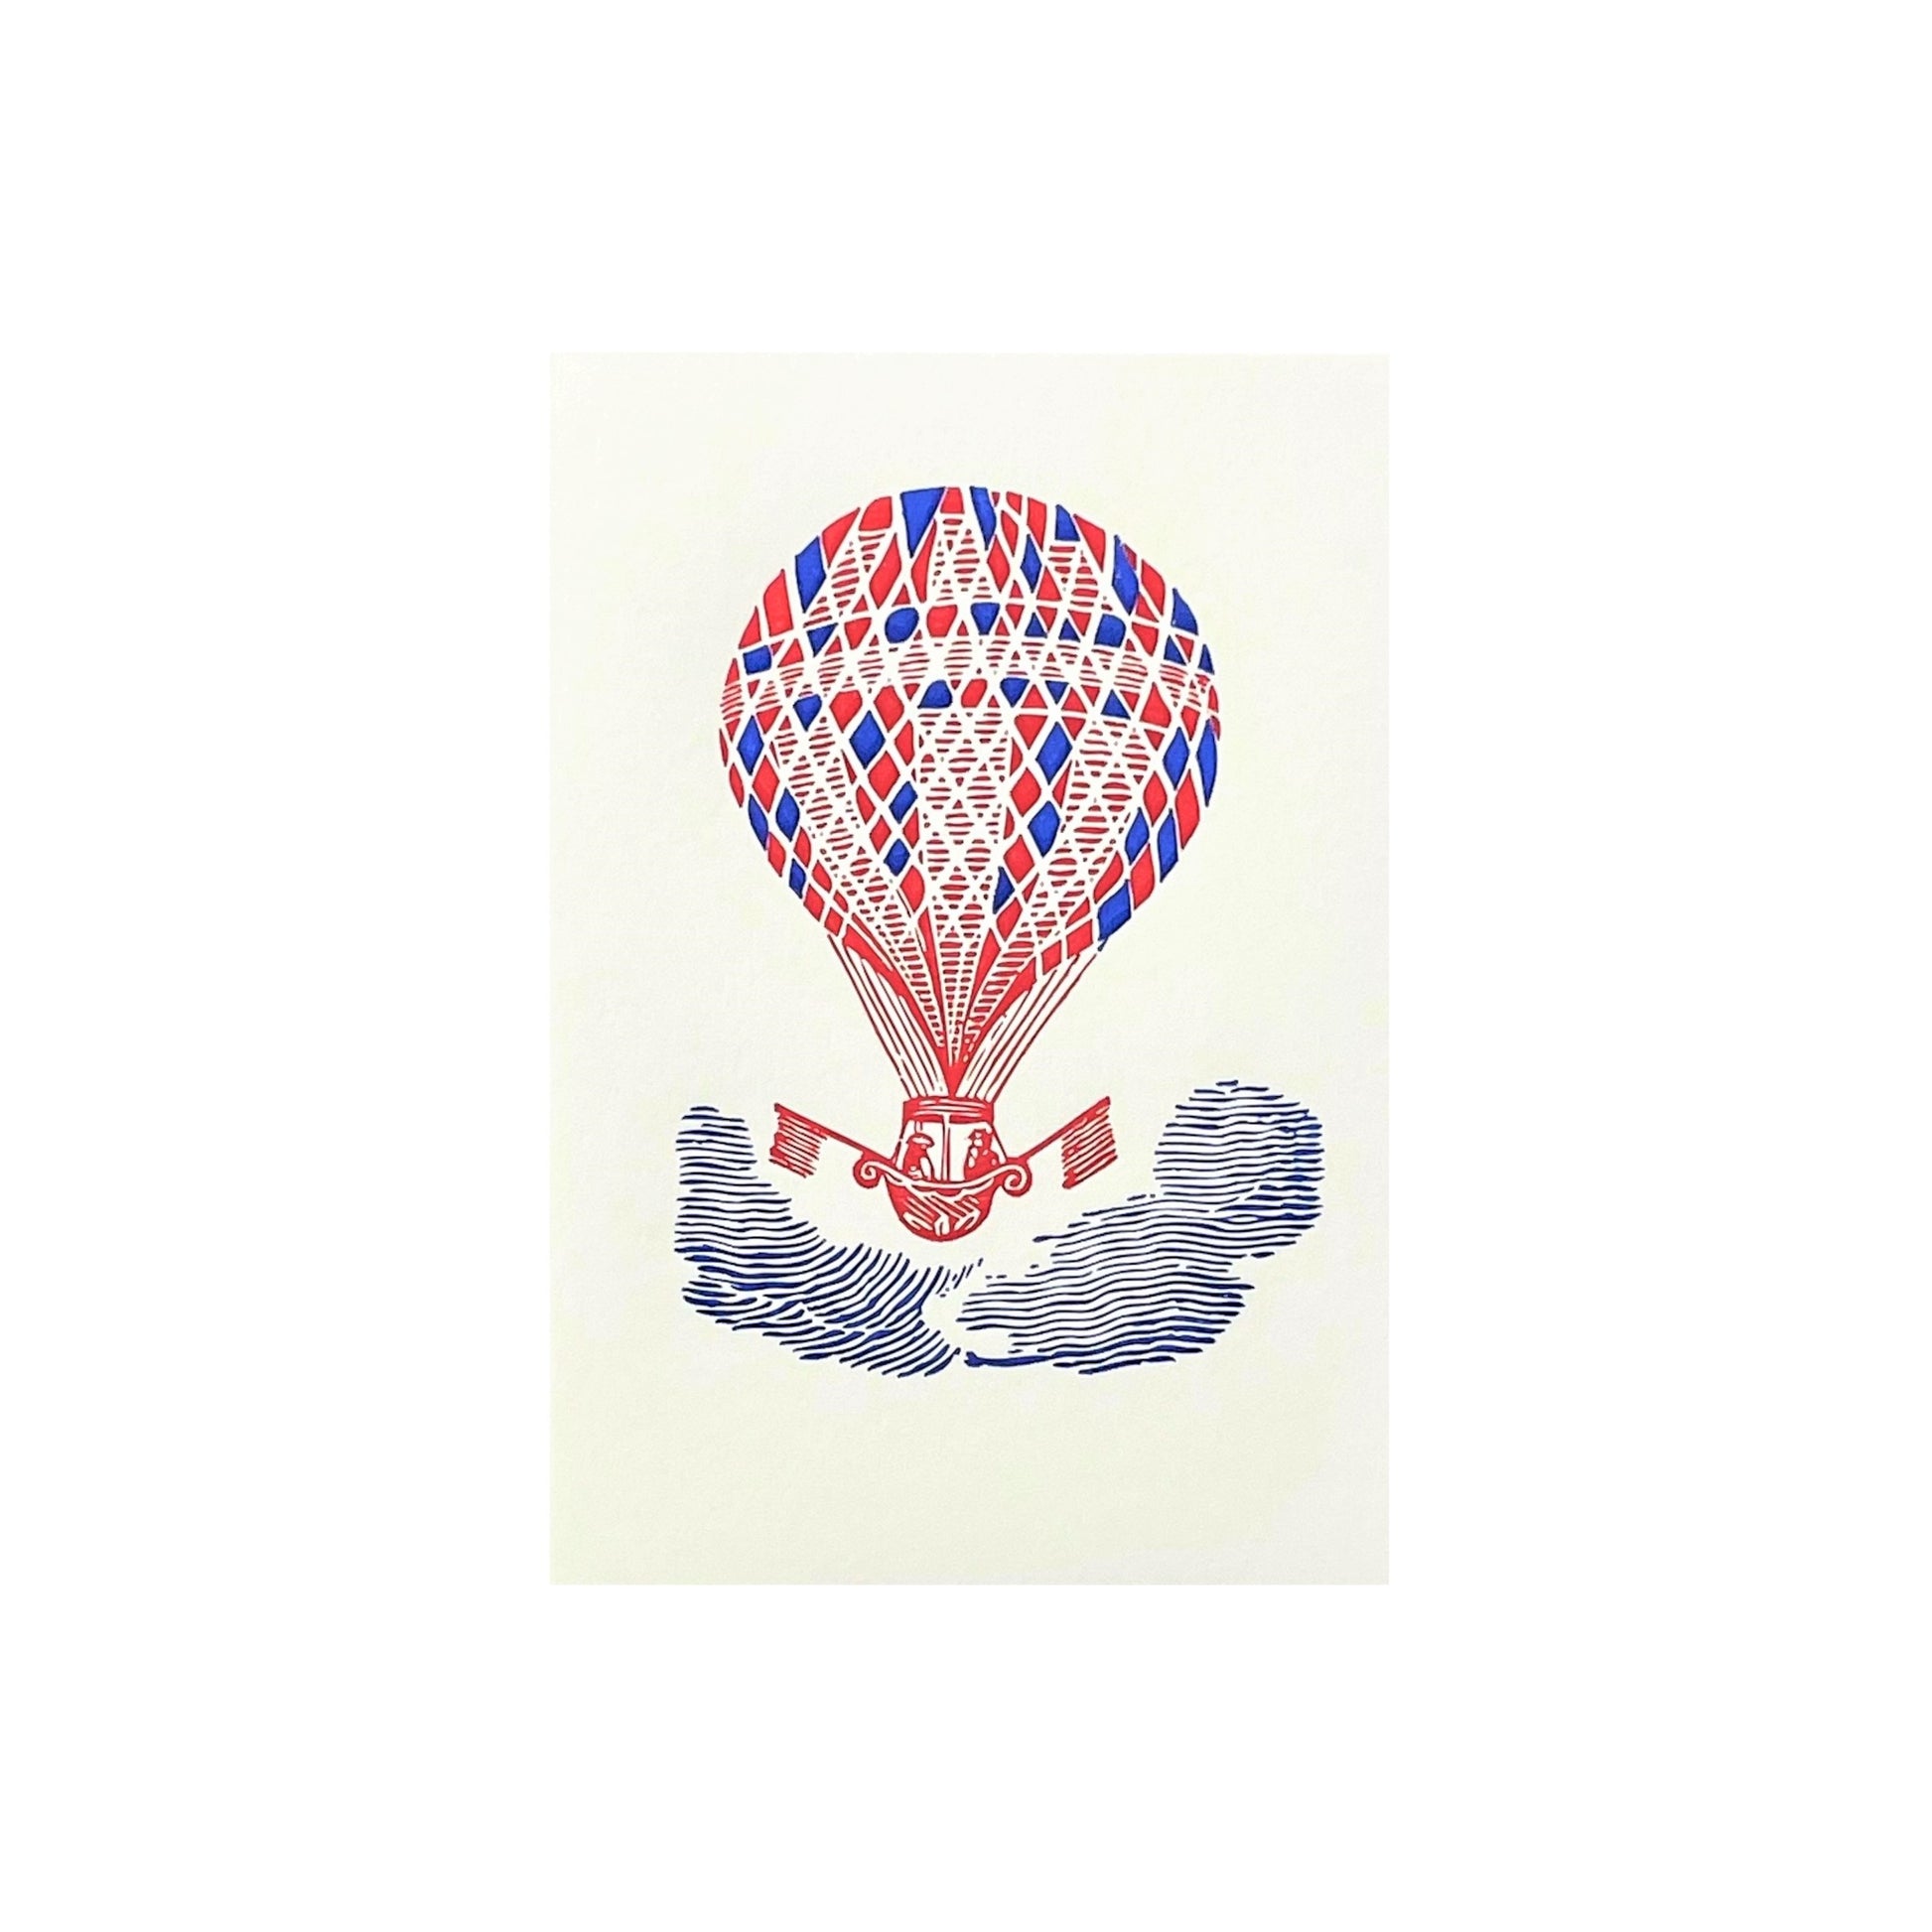 small greetings card of a red and blue hot air balloon, by Archivist Gallery